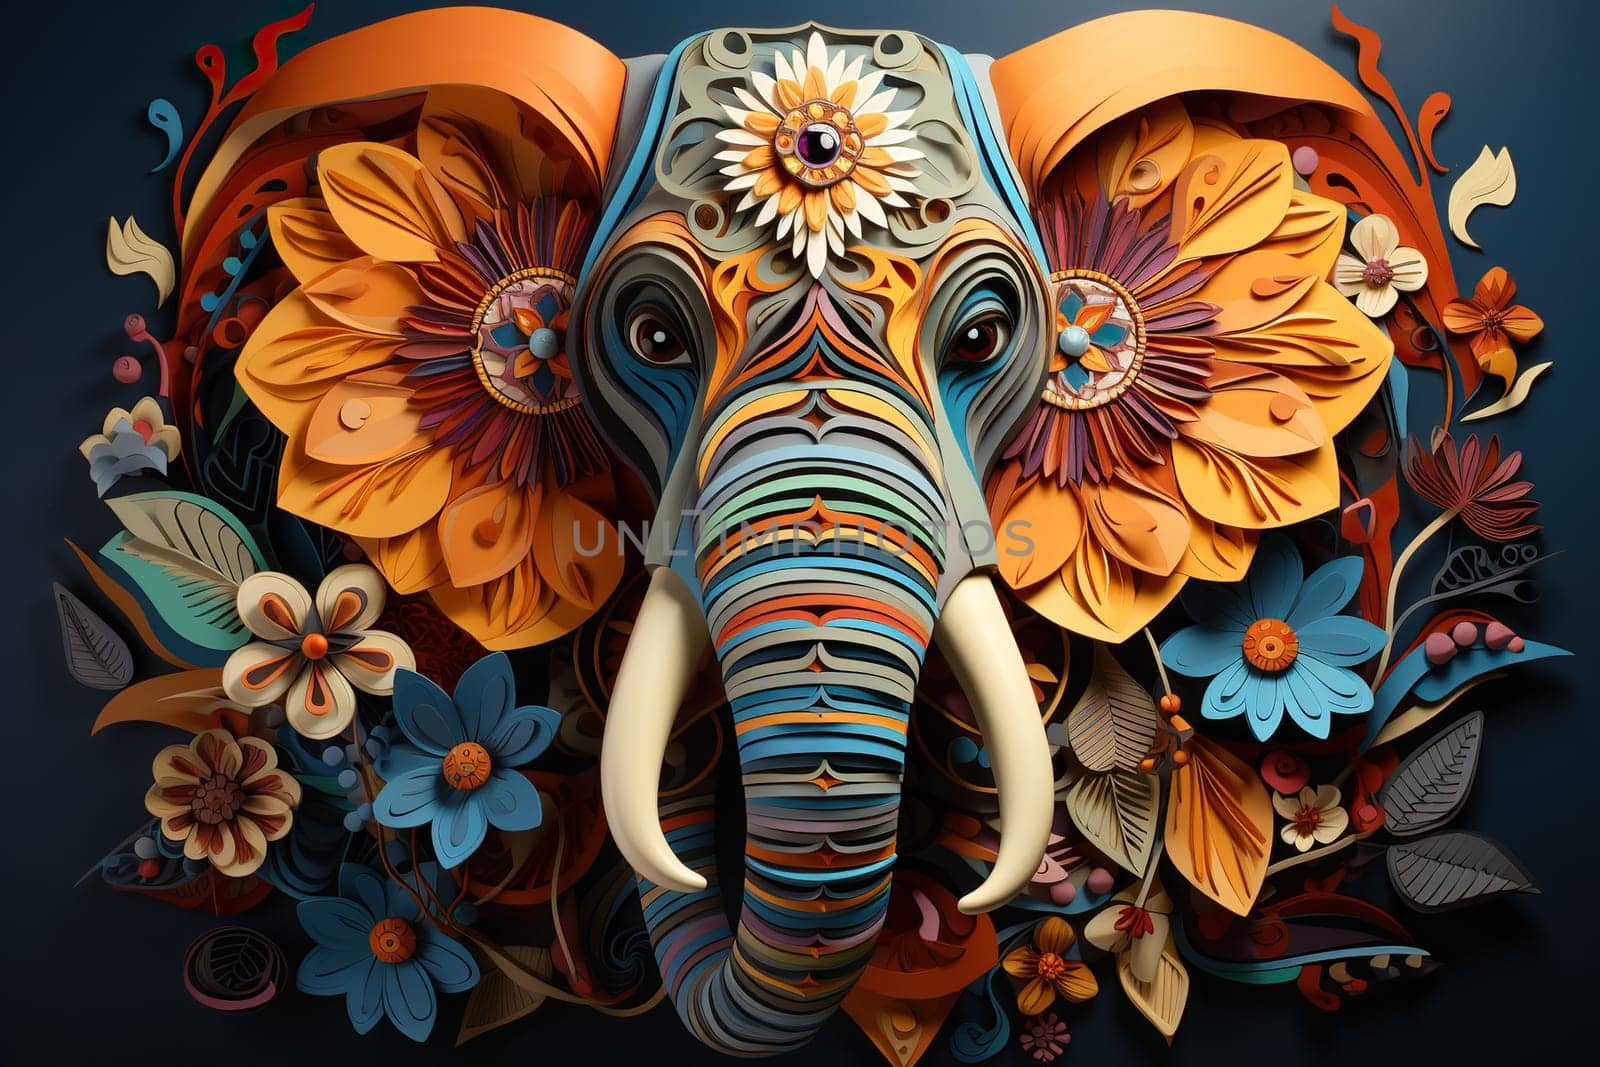 Illustration In Quilling Style Of Indian Elephant by tan4ikk1